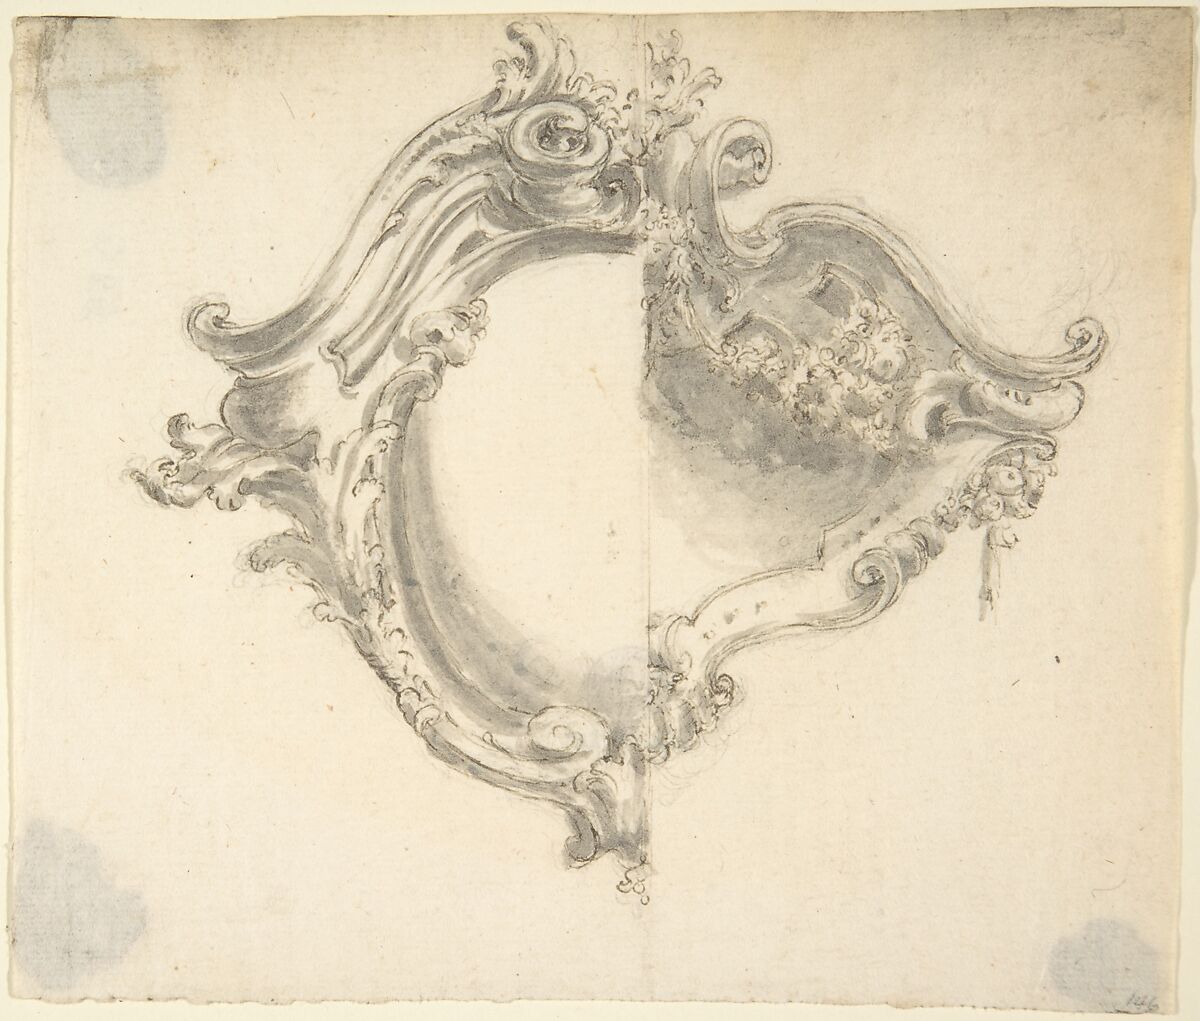 Two Variant Half Designs for a Cartouche, Anonymous, Italian, Piedmontese, 18th century, Pen and brown ink, brush and gray wash, over lead point or graphite; framing lines in pen and brown ink 